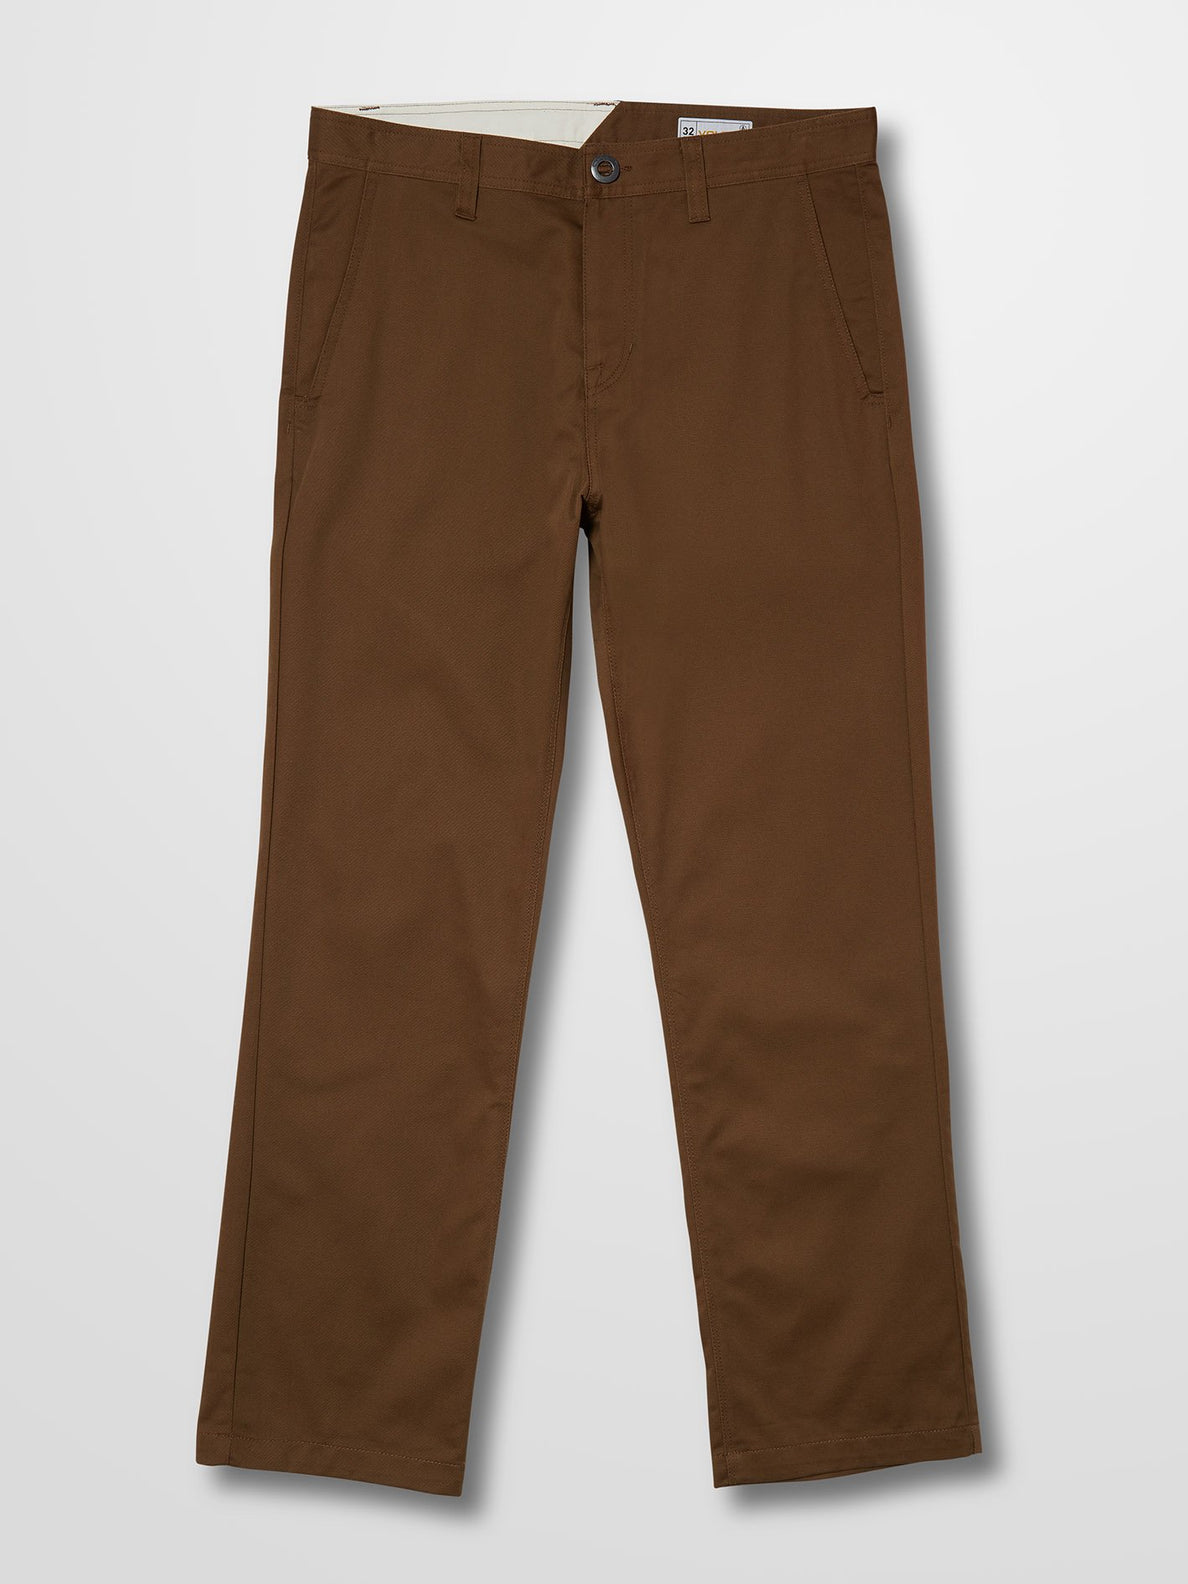 Substance Chino Pant - Vintage Brown (A1112104_VBN) [1]